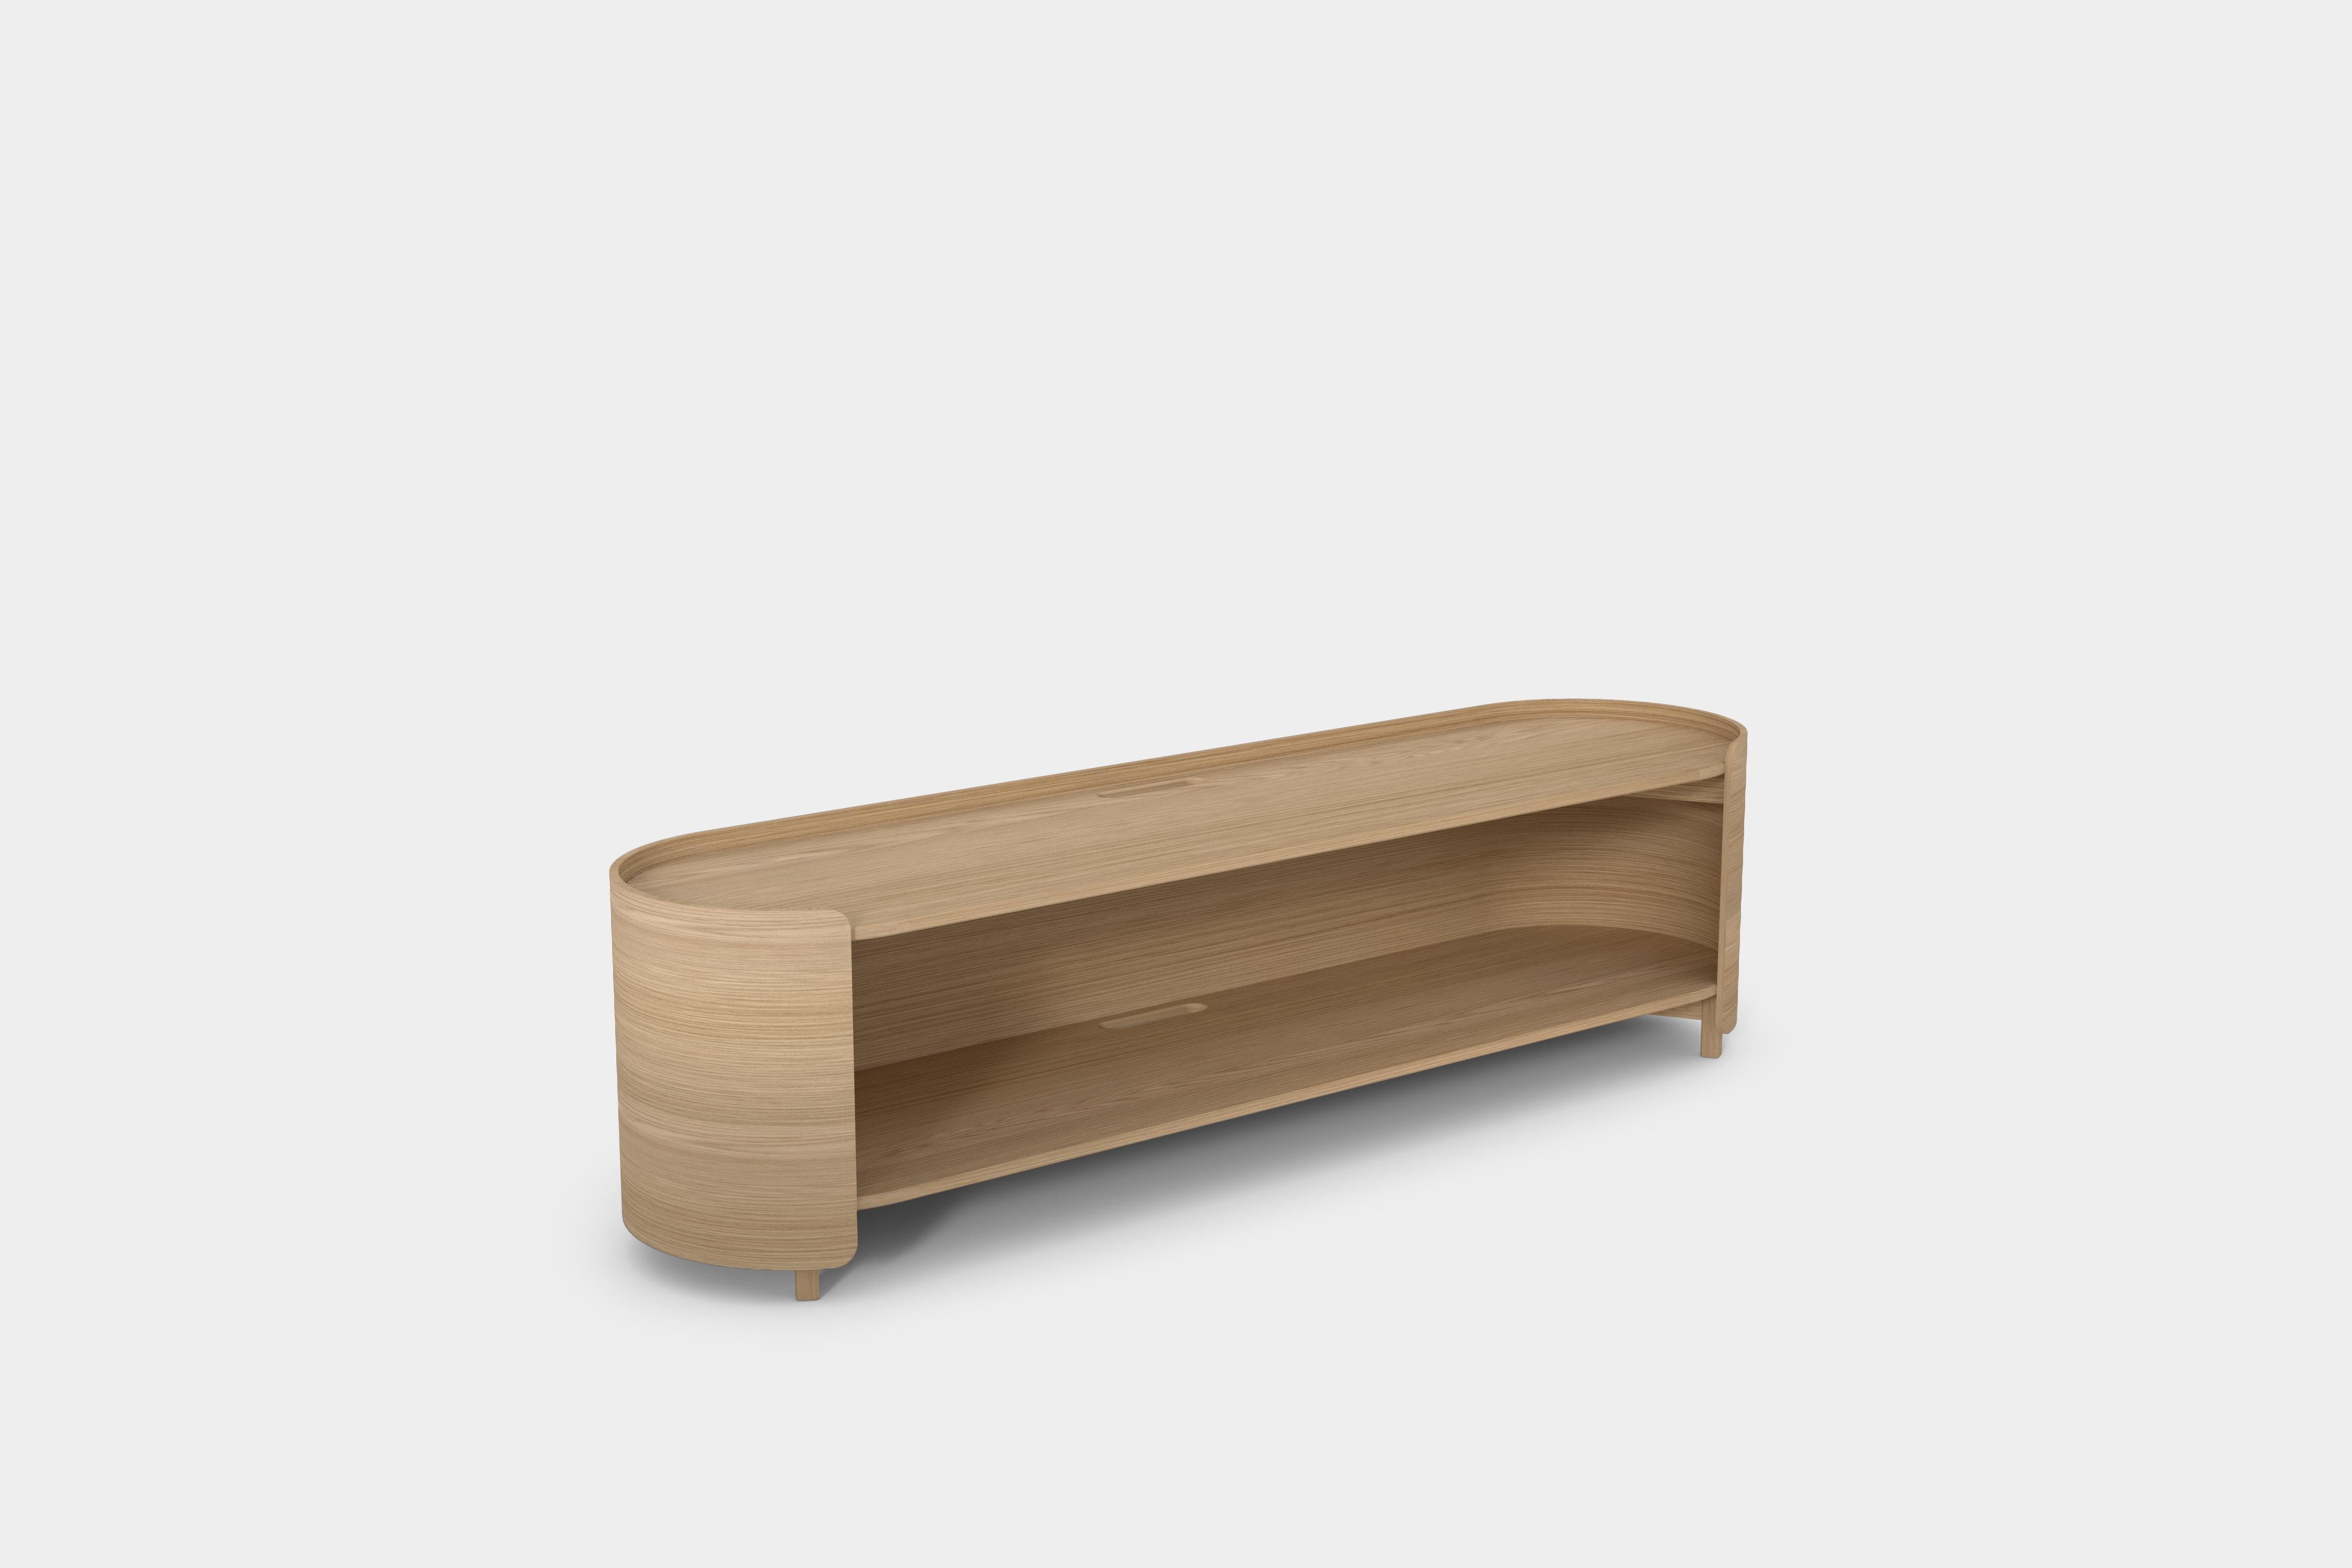 Prima Tv Stand, Entertainment Center, Low Console in Oak Wood Veneer

Prima Collection is born under the idea of creating fundamental pieces for the home, those that you simply cannot imagine your space without.

Prima TV Stand provides a great